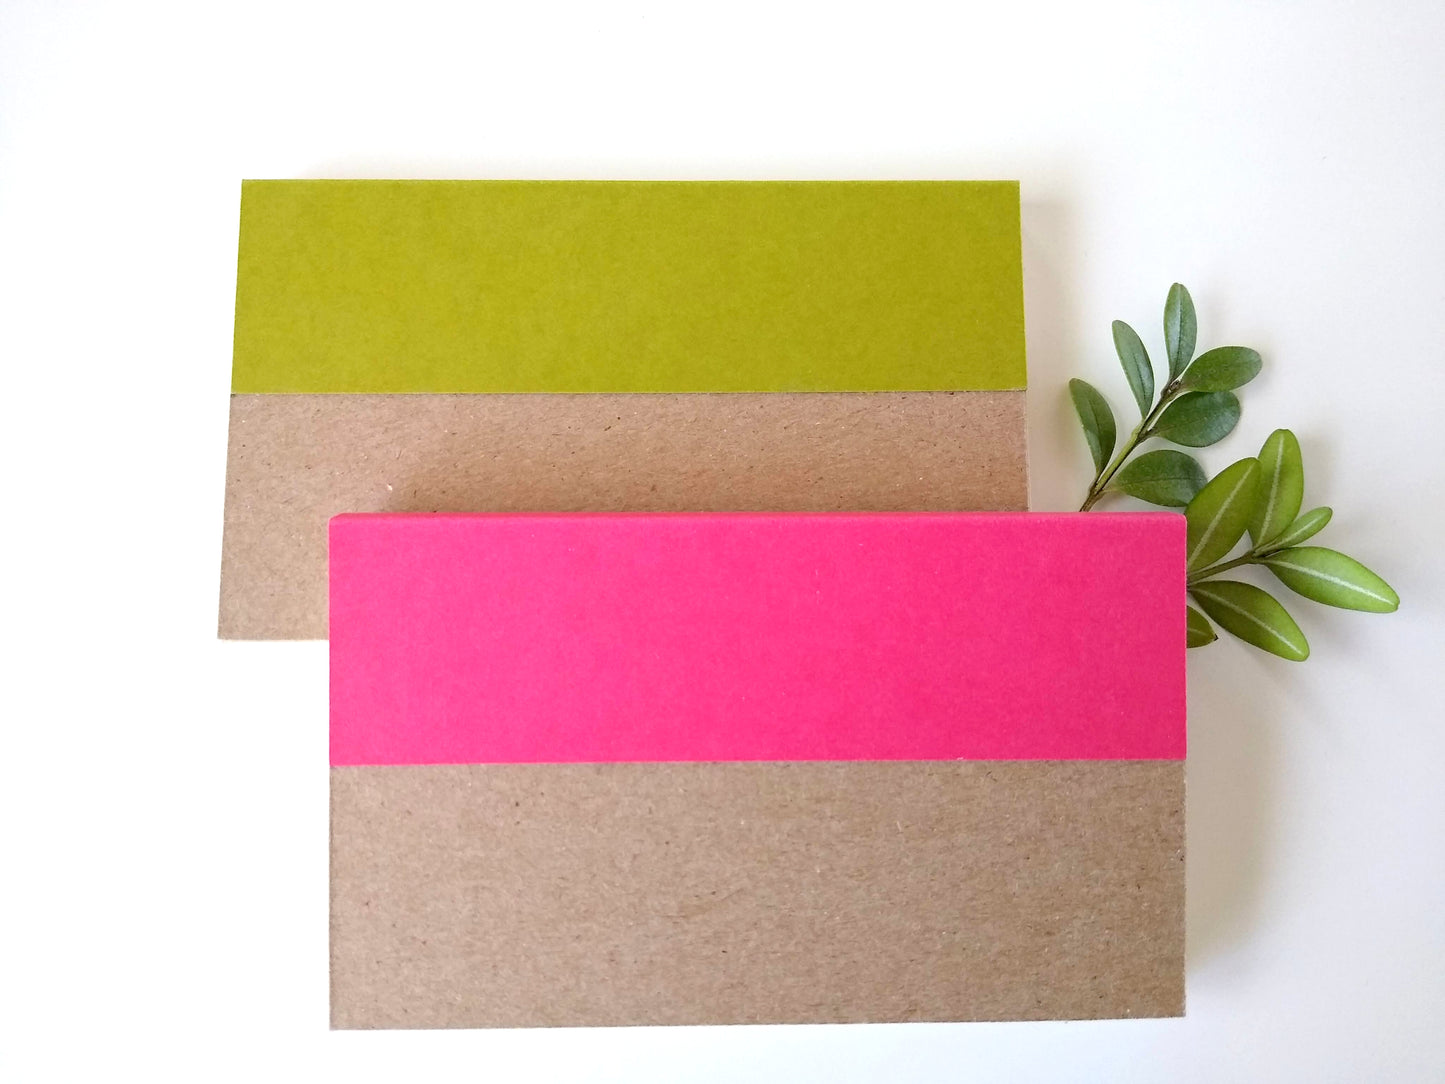 The back of the notepads shows how the colored covers are glued to the back cardboard. They rest on a white background with two sprigs of green leaves around them.